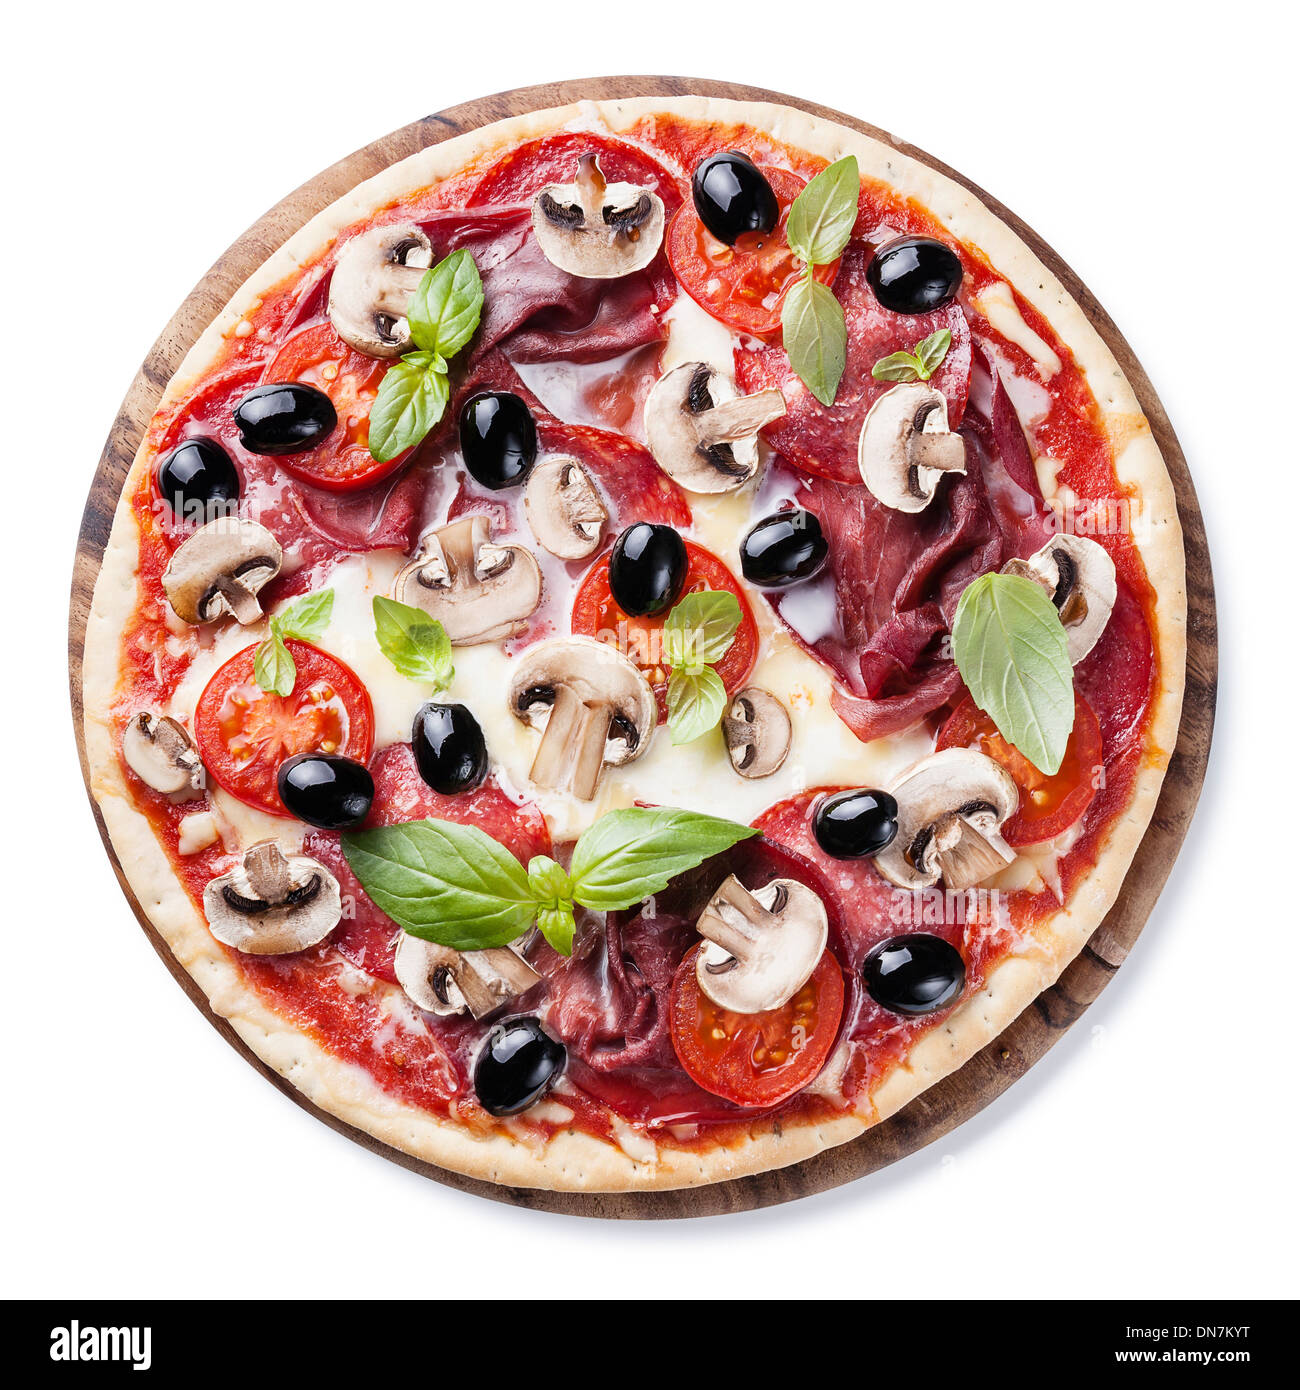 Italian pizza with salami, mushrooms, olives and basil leaves on white background Stock Photo